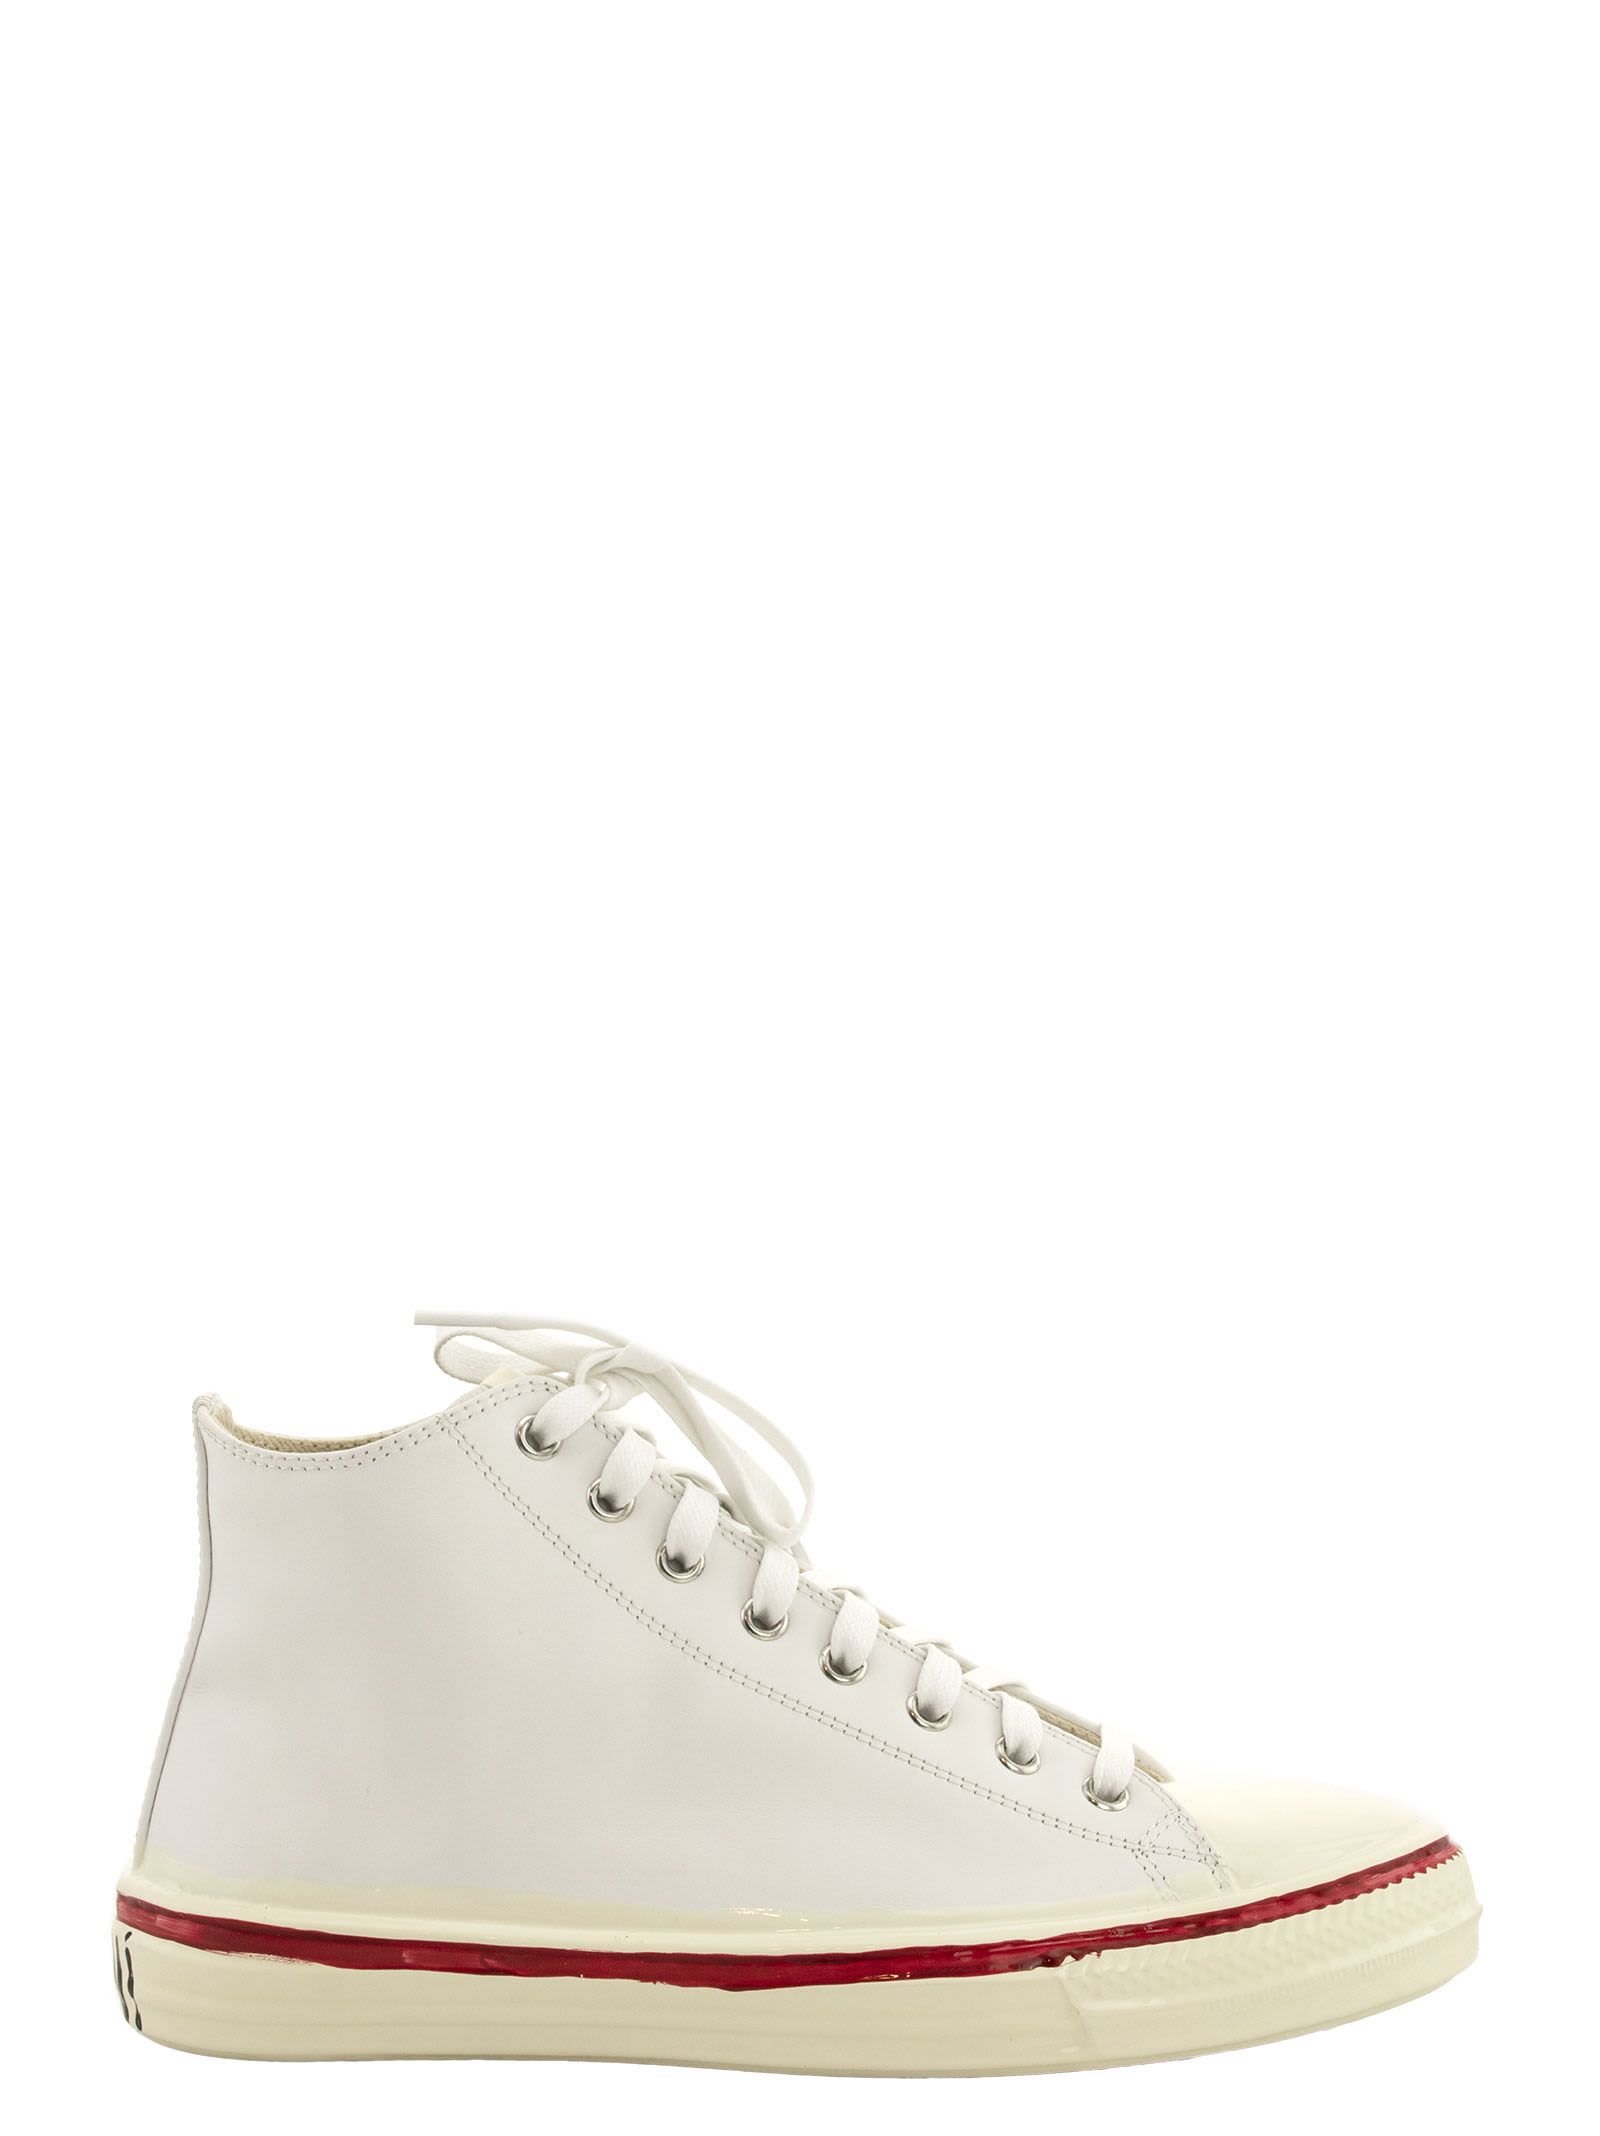 Buy Marni Graffiti White High-top Sneaker In Leather With Partial Rubber Coating online, shop Marni shoes with free shipping